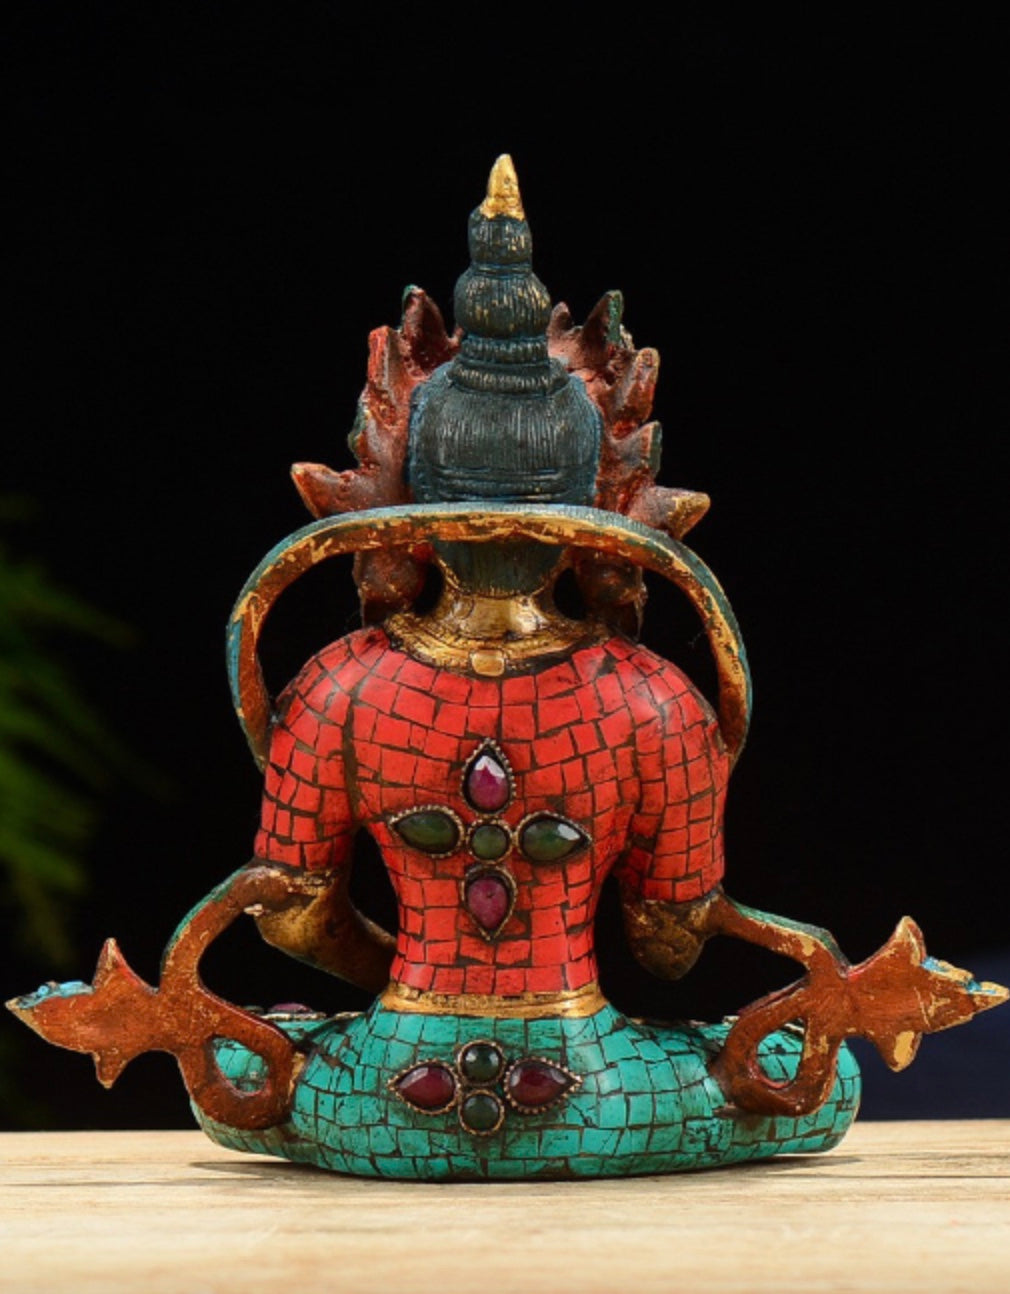 Authentic Handcrafted Nepalese Dipankara Buddha Statue with Pure Copper with Turquoise Inlay | Zen Zone Buddhist Shop